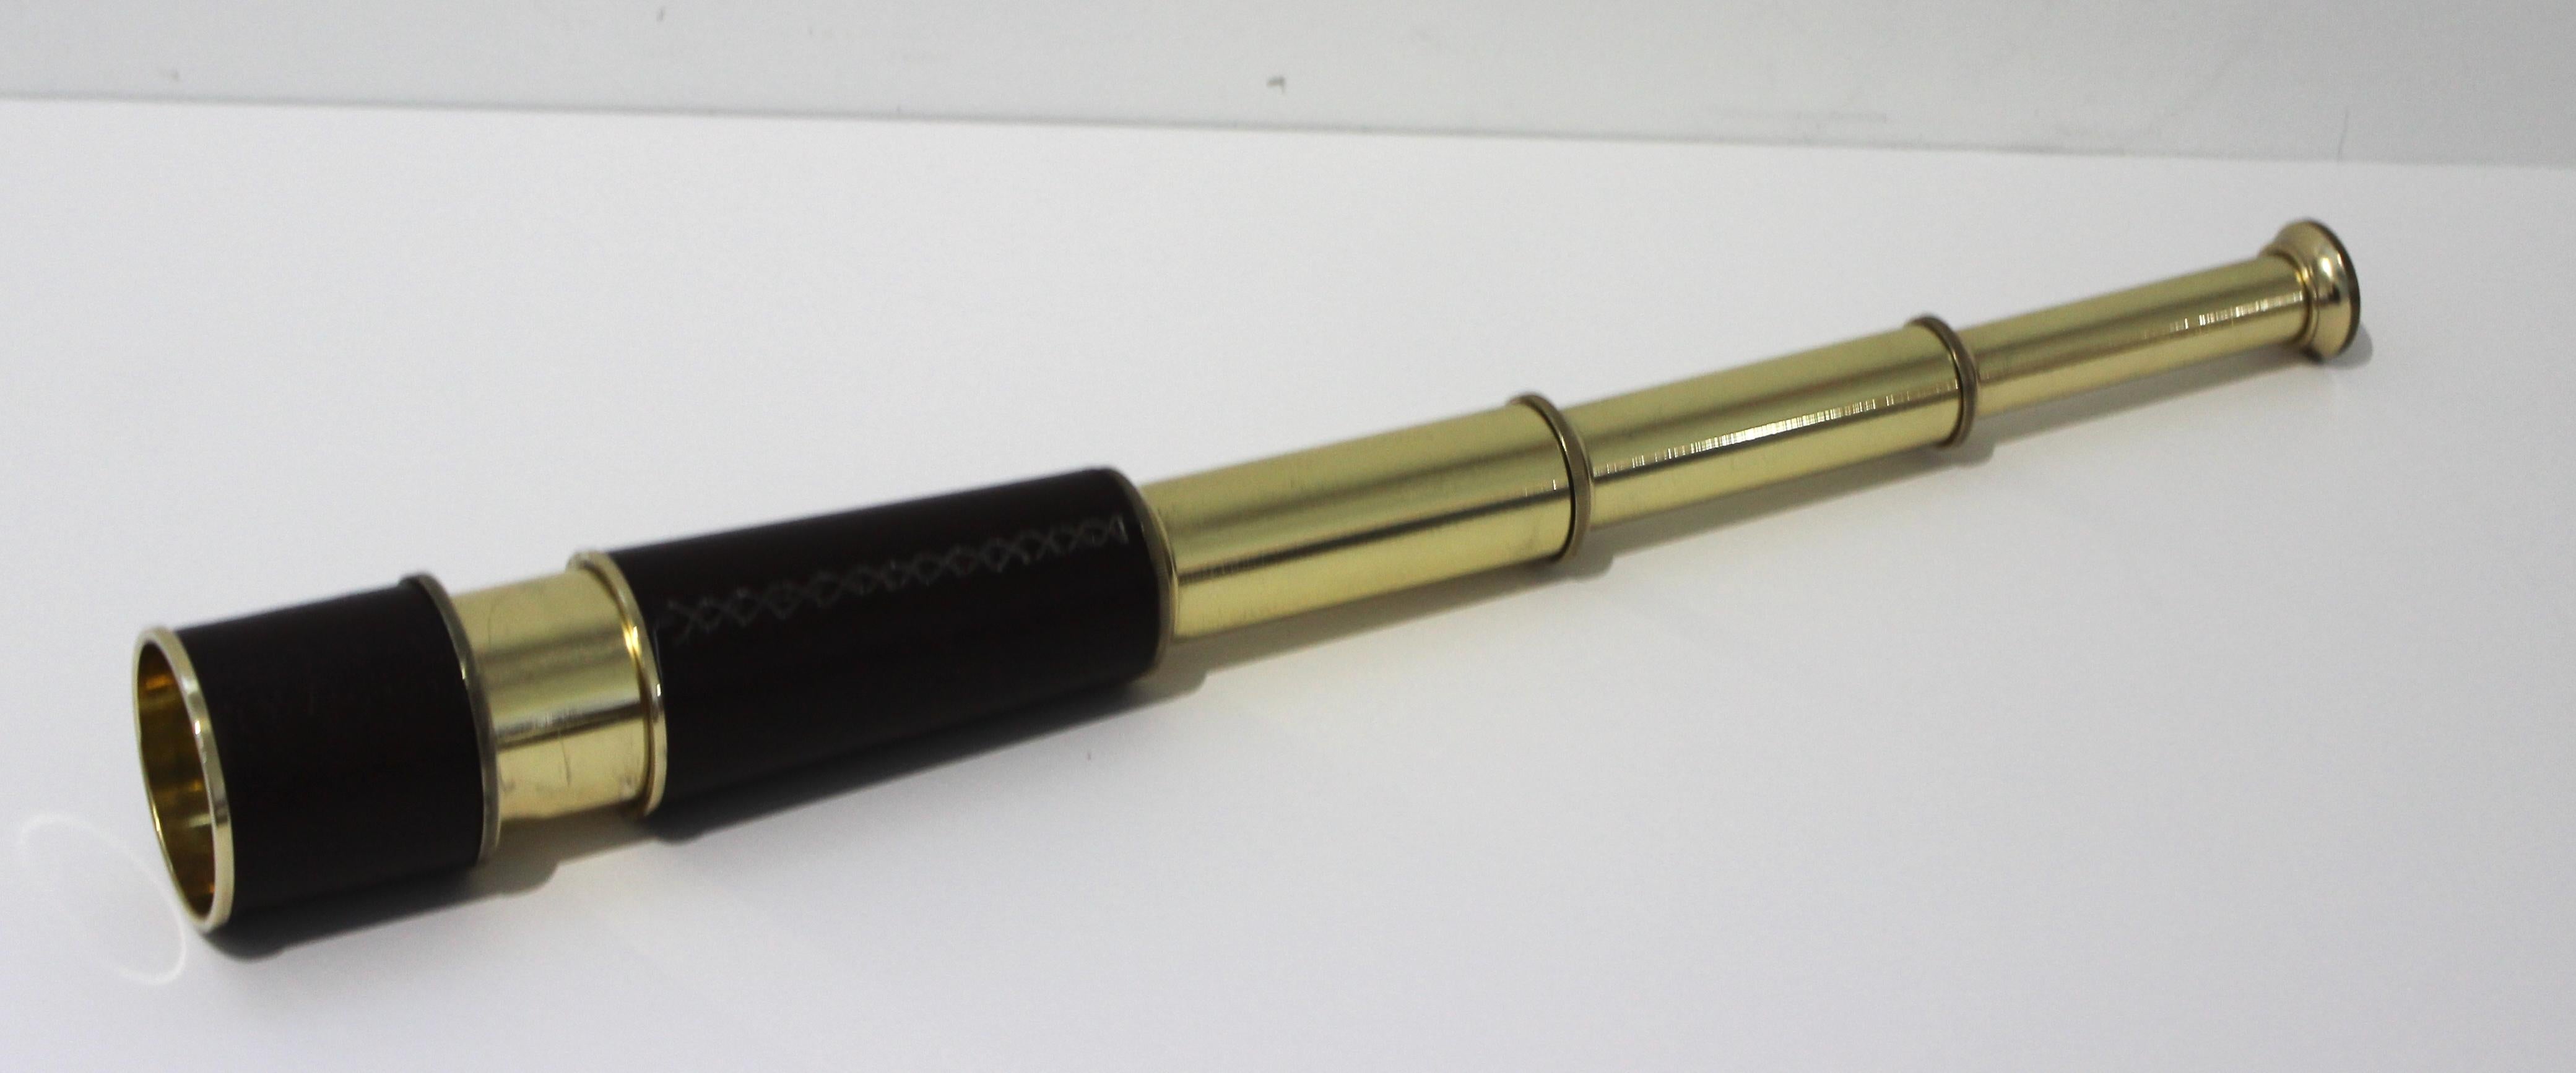 Mid-century spyglass brass & leather (similar to a telescope) expands from 7 1/8 to 17 1/4